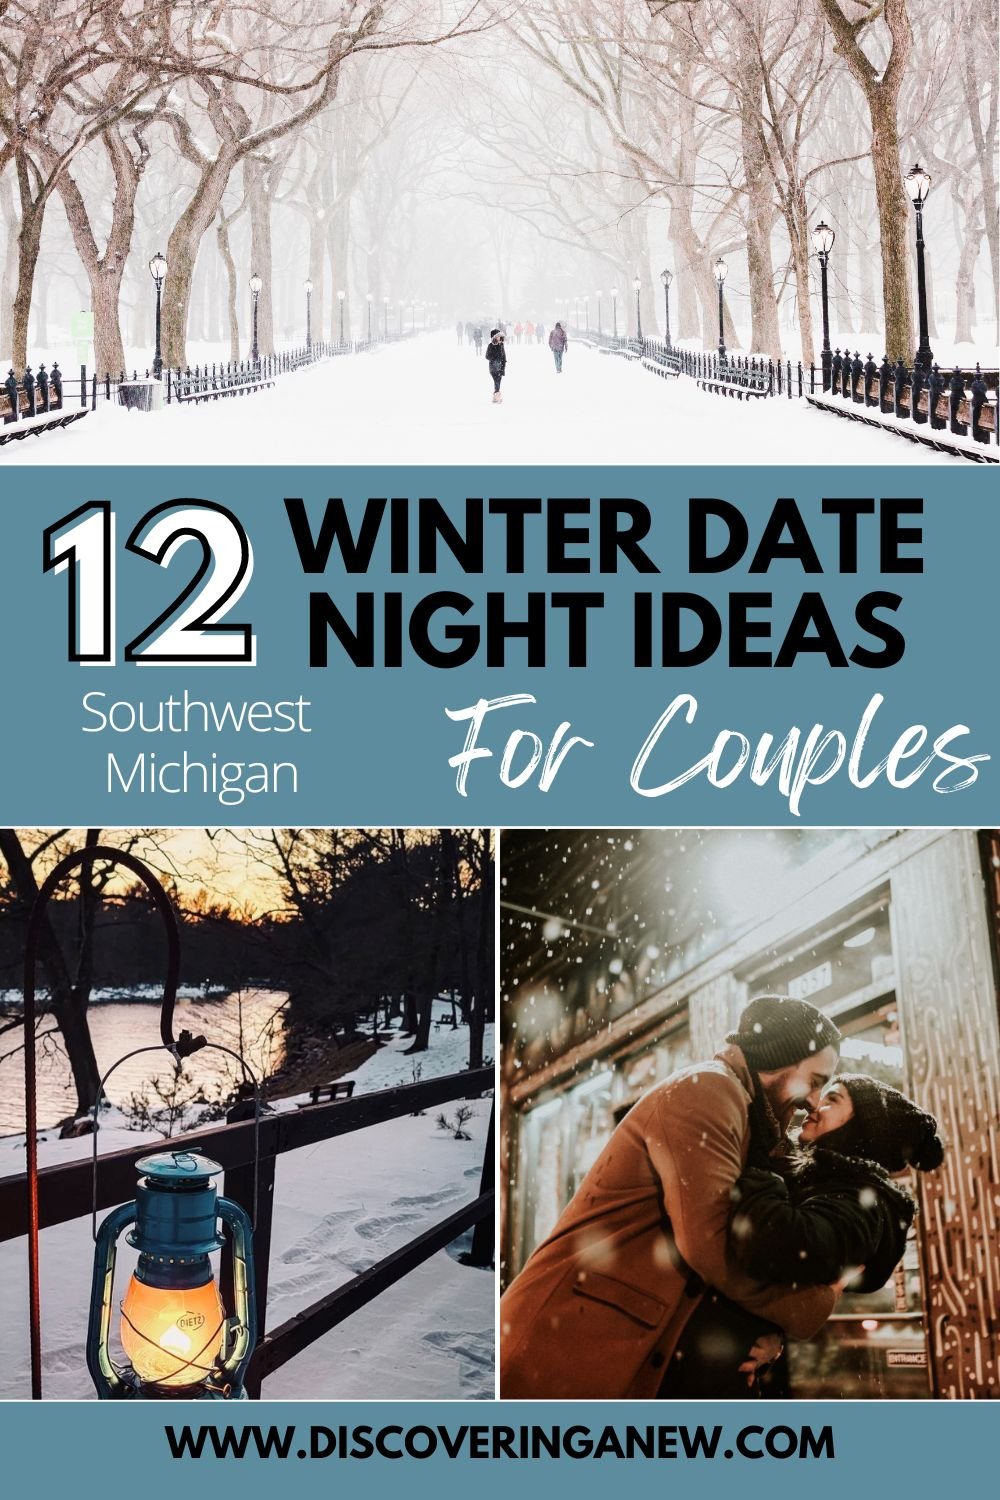 Indoor Campout - At Home Date Night Idea for Married Couples